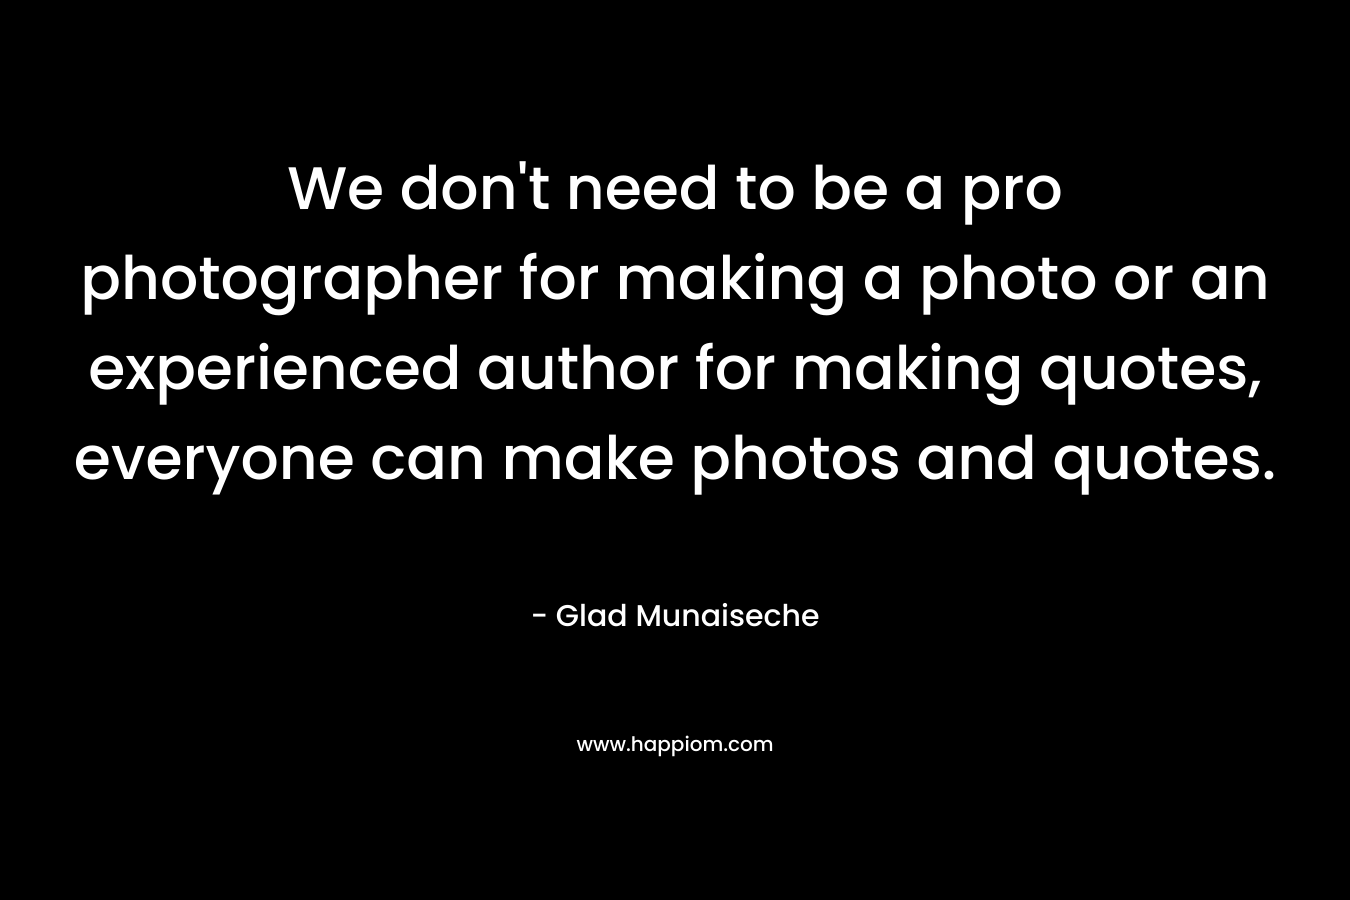 We don’t need to be a pro photographer for making a photo or an experienced author for making quotes, everyone can make photos and quotes. – Glad Munaiseche